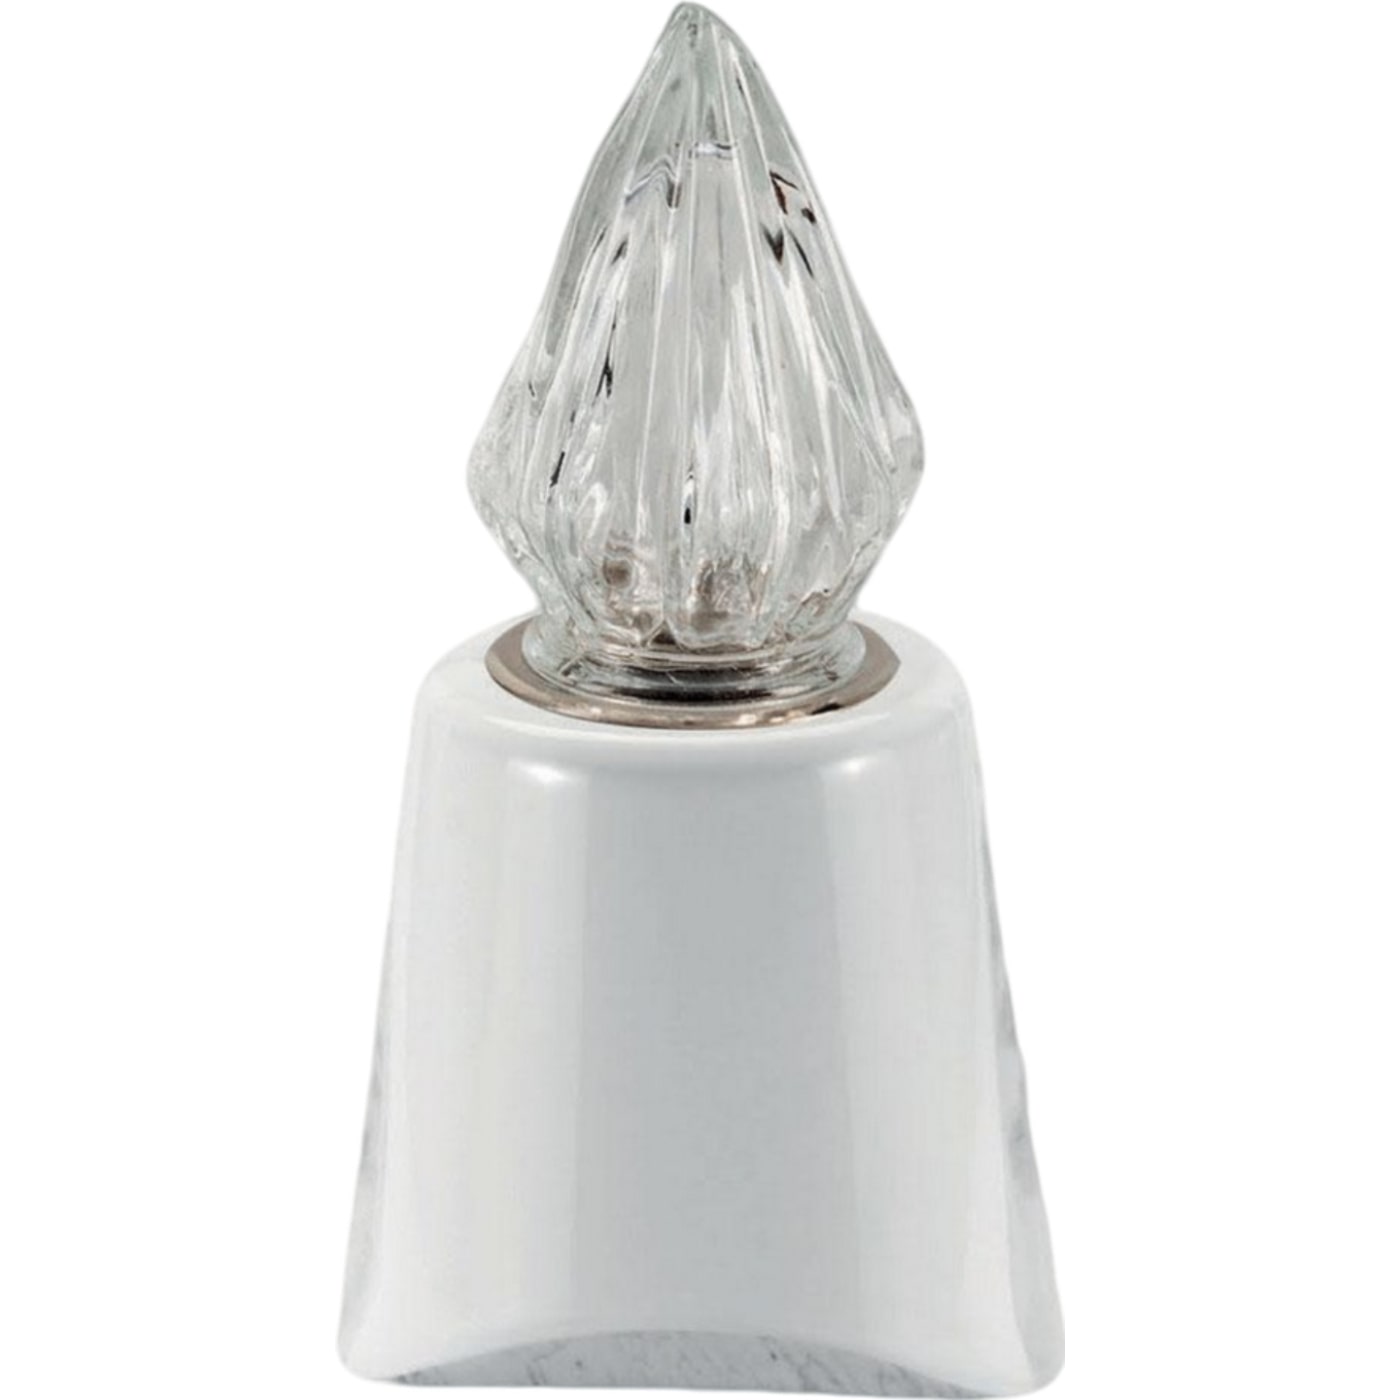 Grave light Giselle carrara 10x10cm - 3.9x3.9in In white porcelain with carrara decoration, wall attached GI130P/CARR